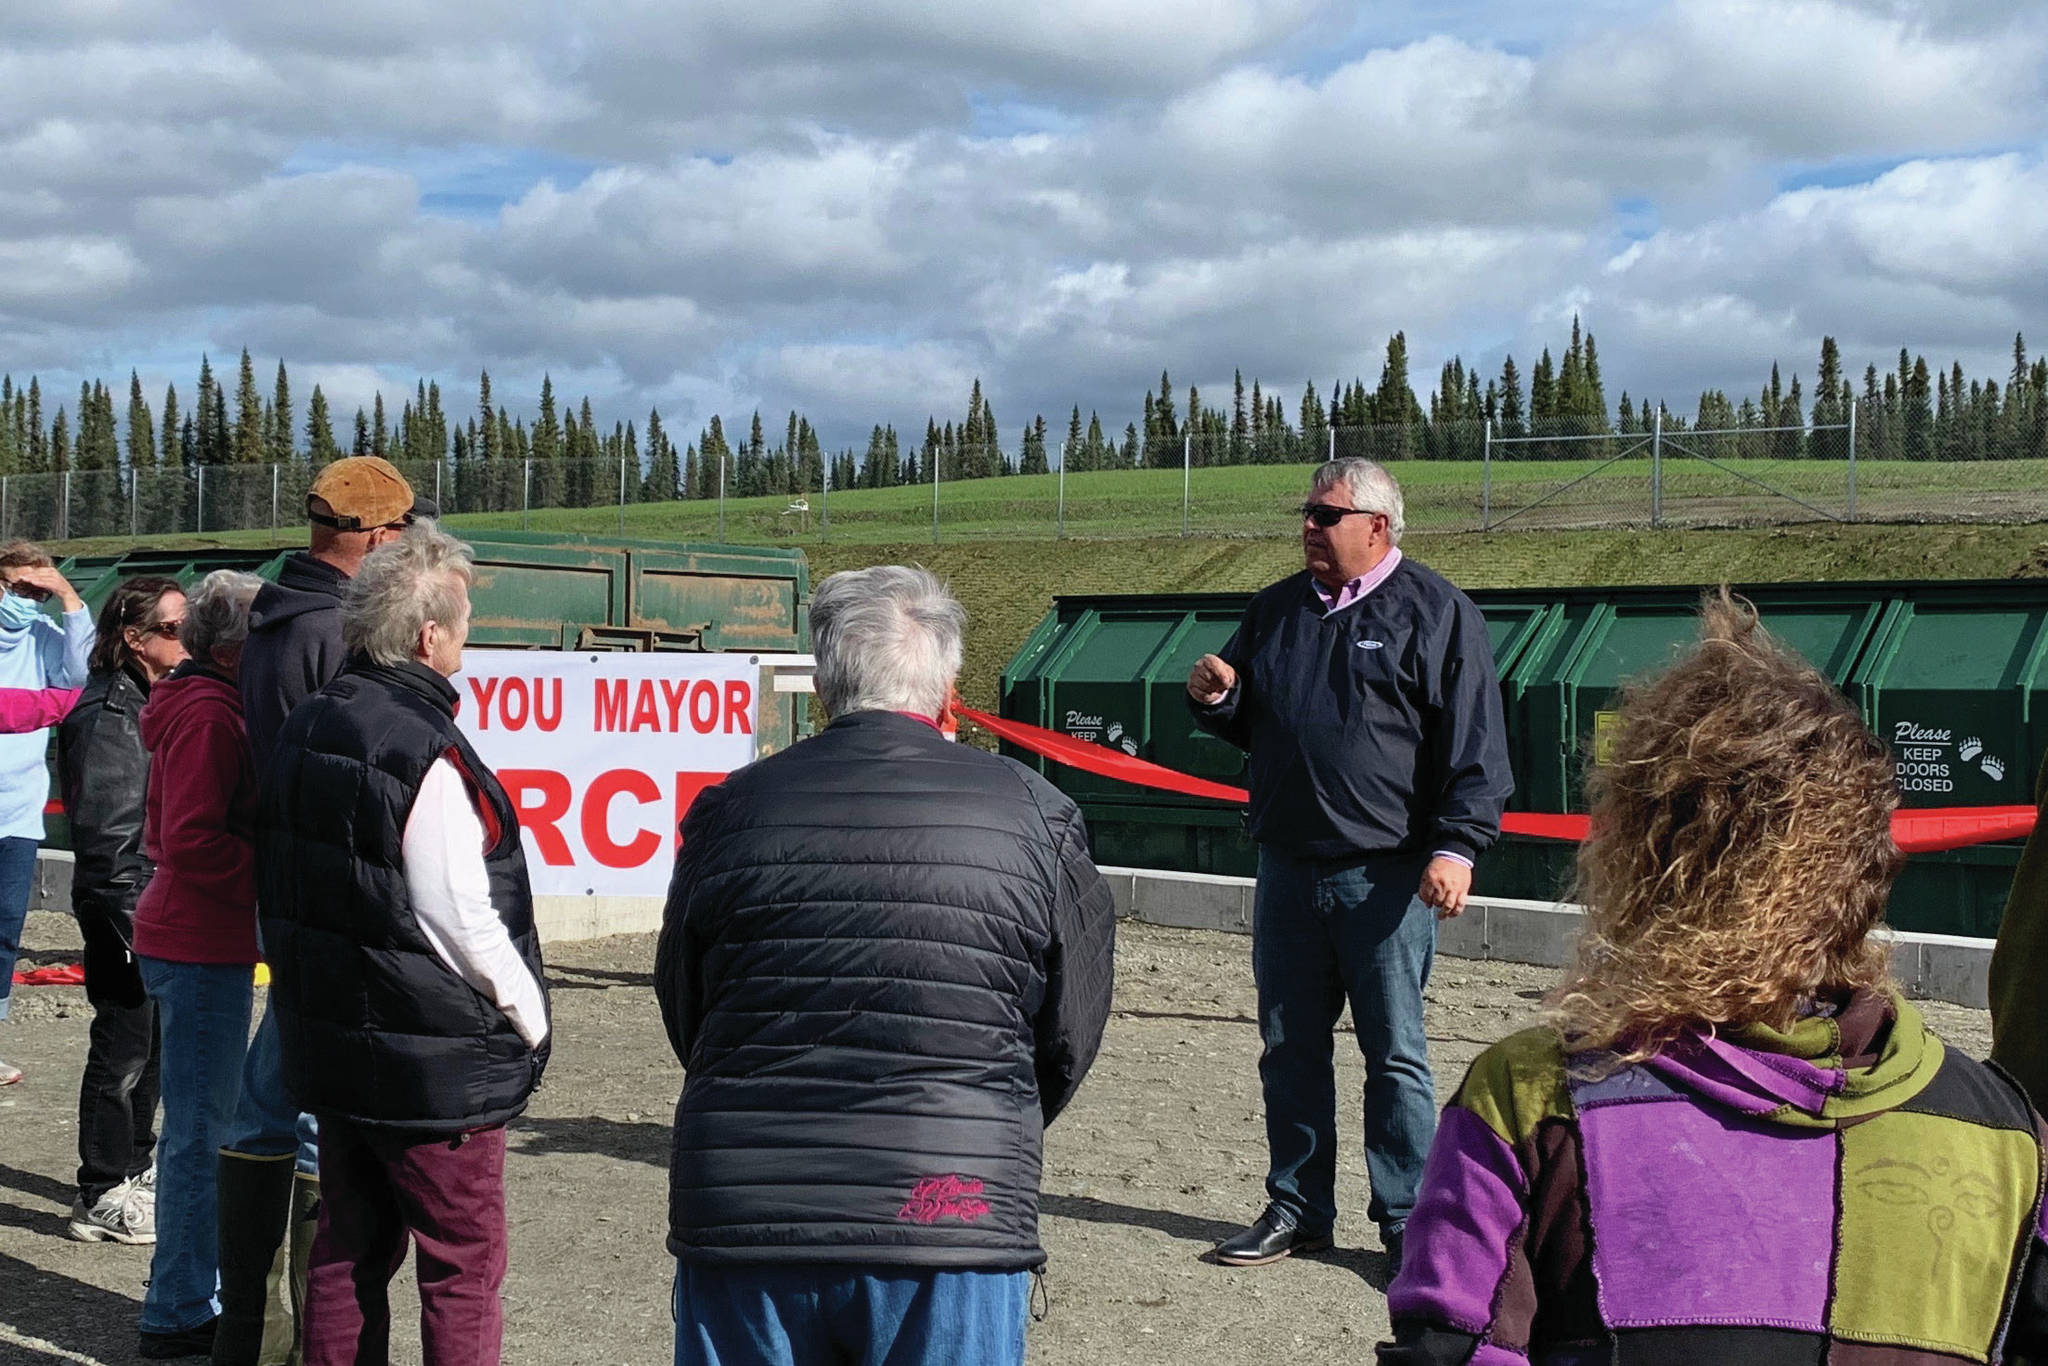 Kenai Peninsula Borough Mayor Charlie Pierce addresses patrons at the Funny River Solid Waste Transfer Site in Funny River, Alaska, on Friday, Sept. 18, 2020. More than $670,000 in improvements are being made to the facility. (Ashlyn O’Hara/Peninsula Clarion)